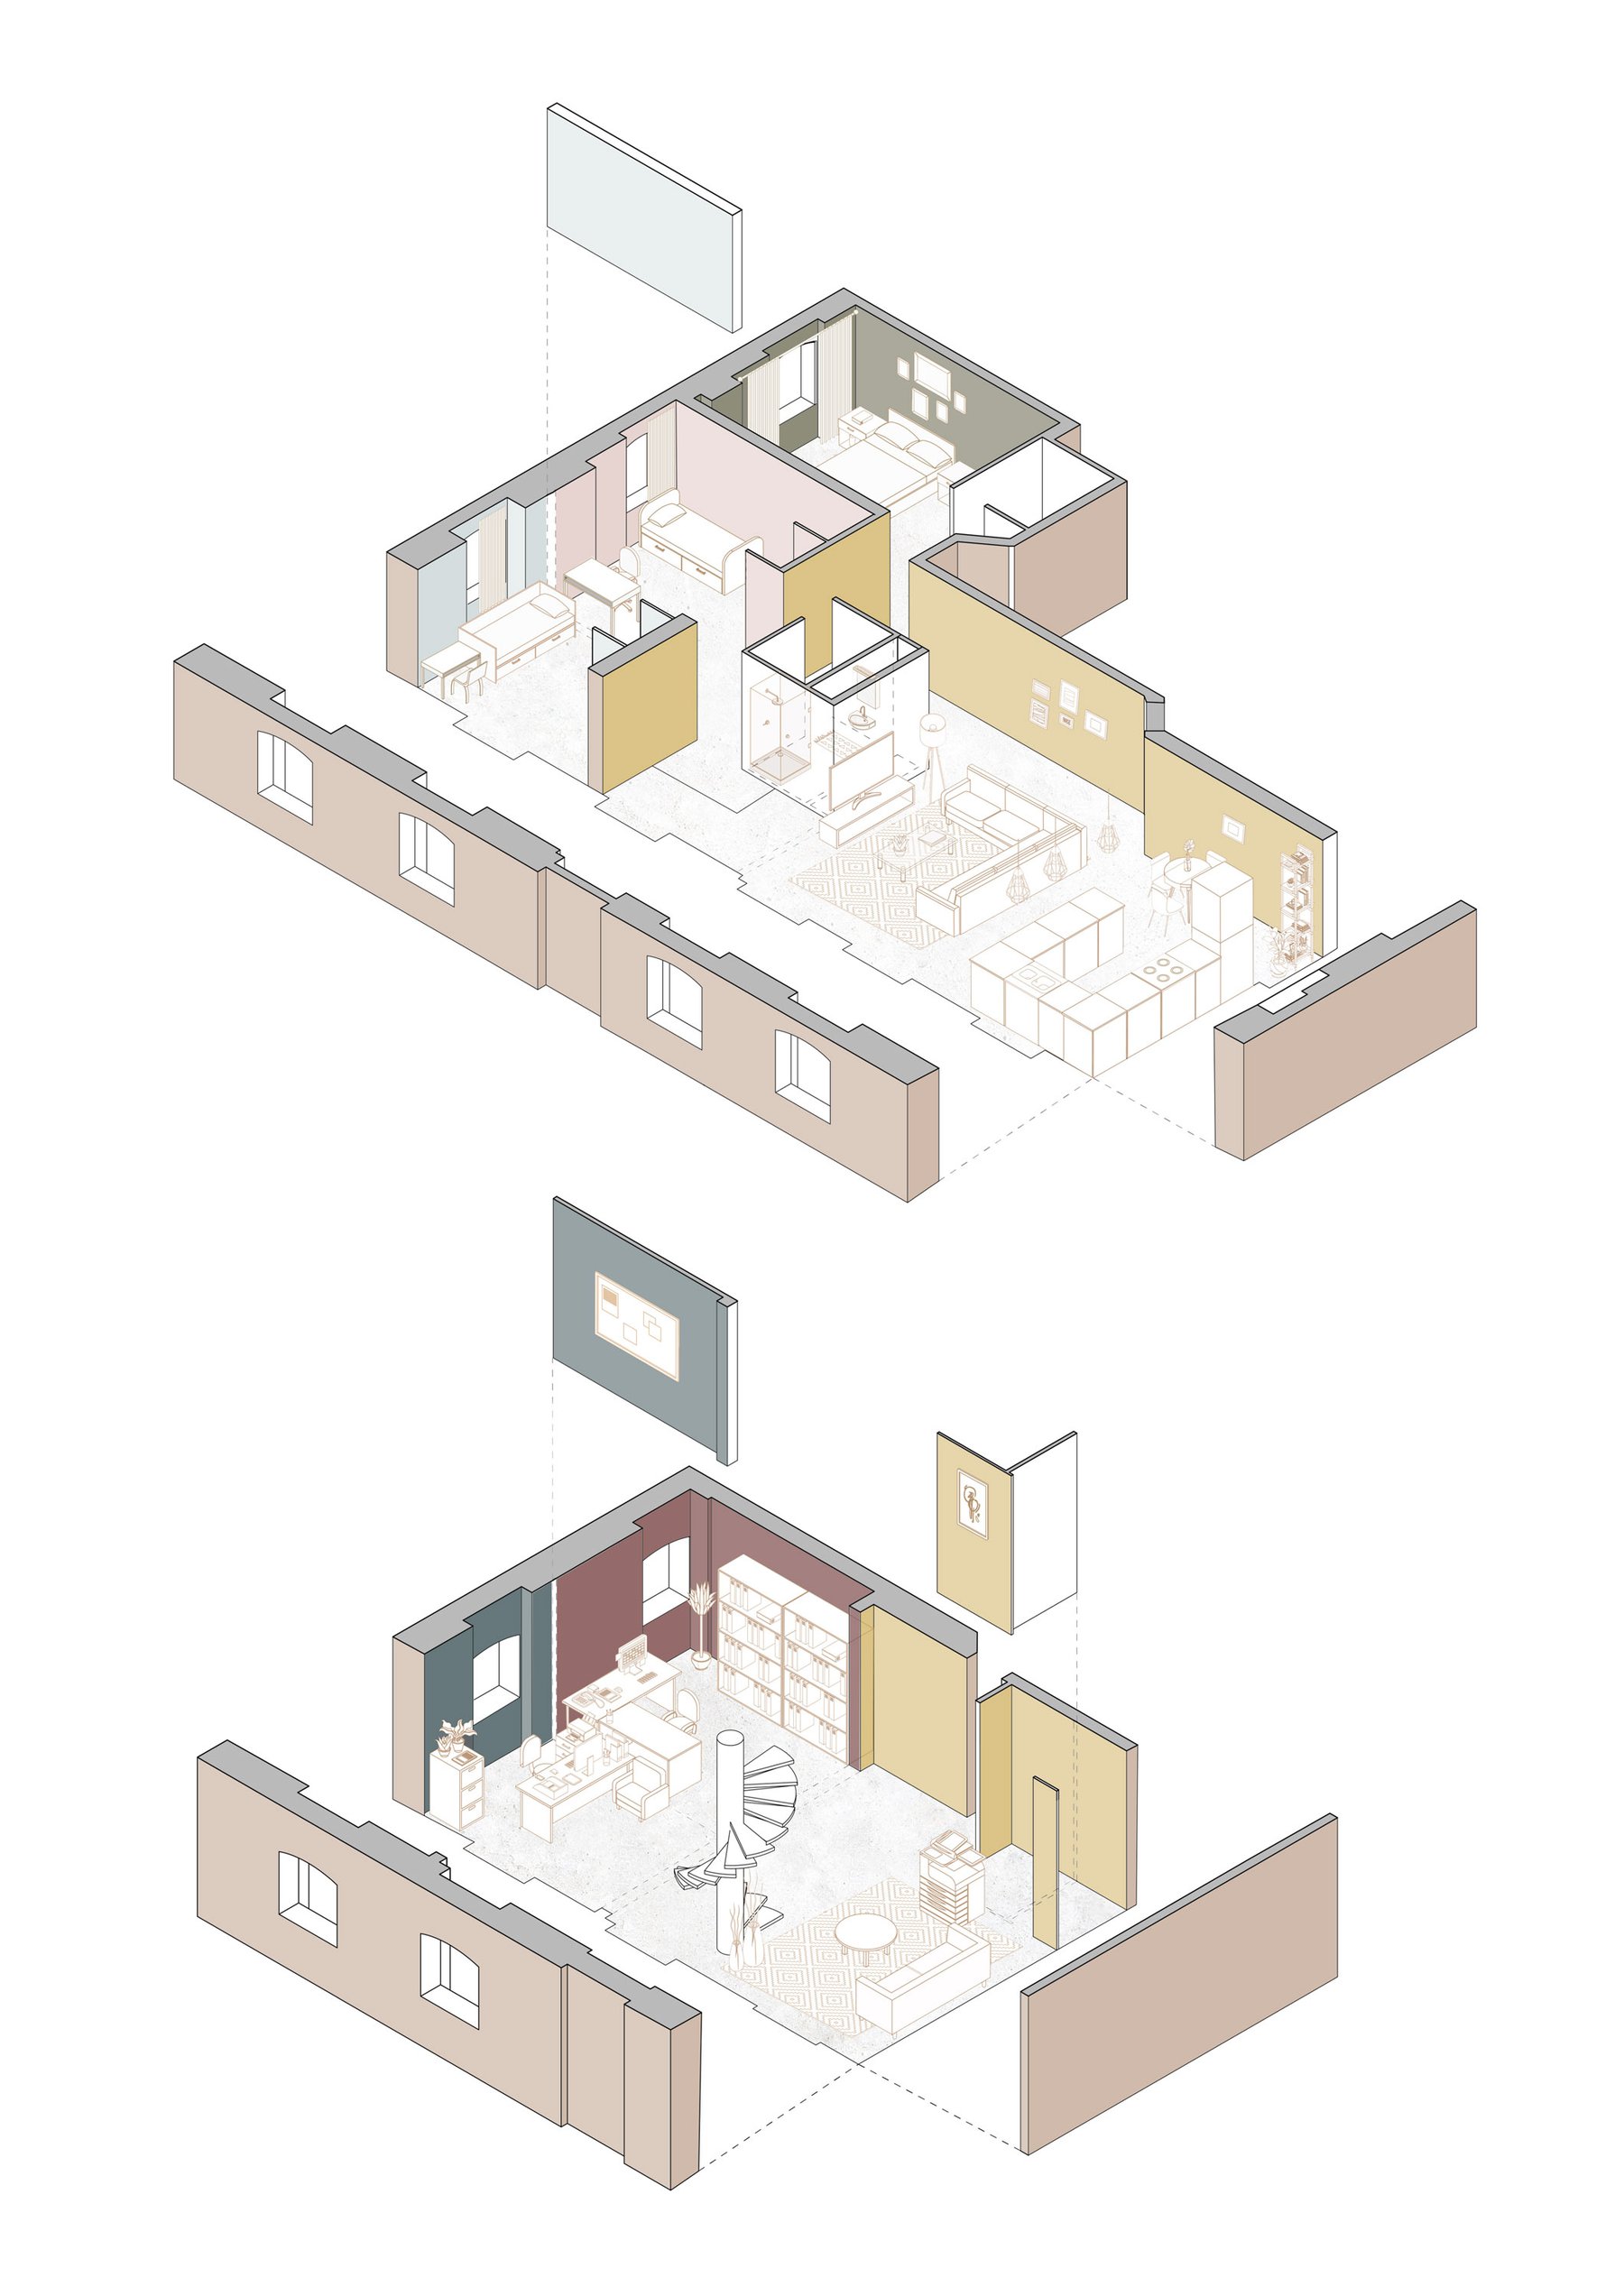 An isometric drawing of the apartment.